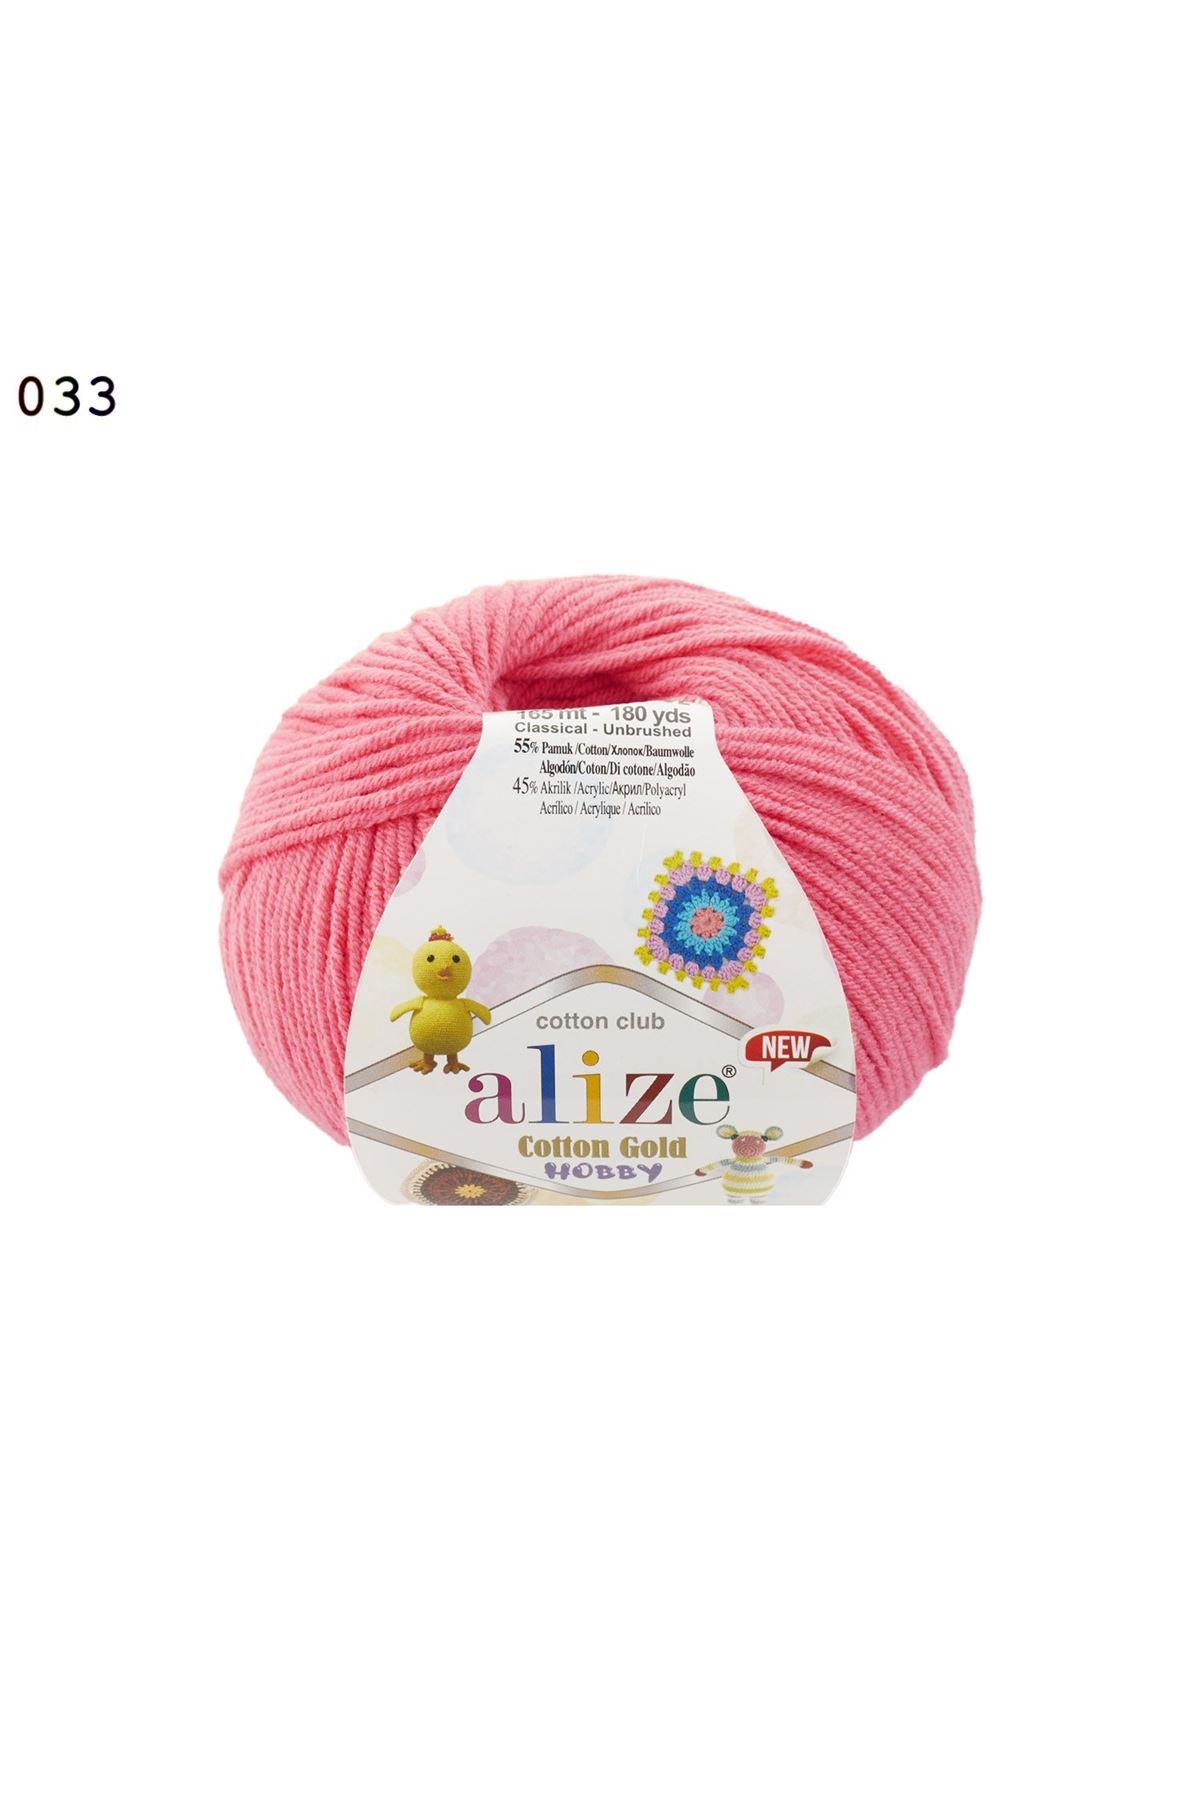 Alize Cotton Gold Hobby  Renk No: 033